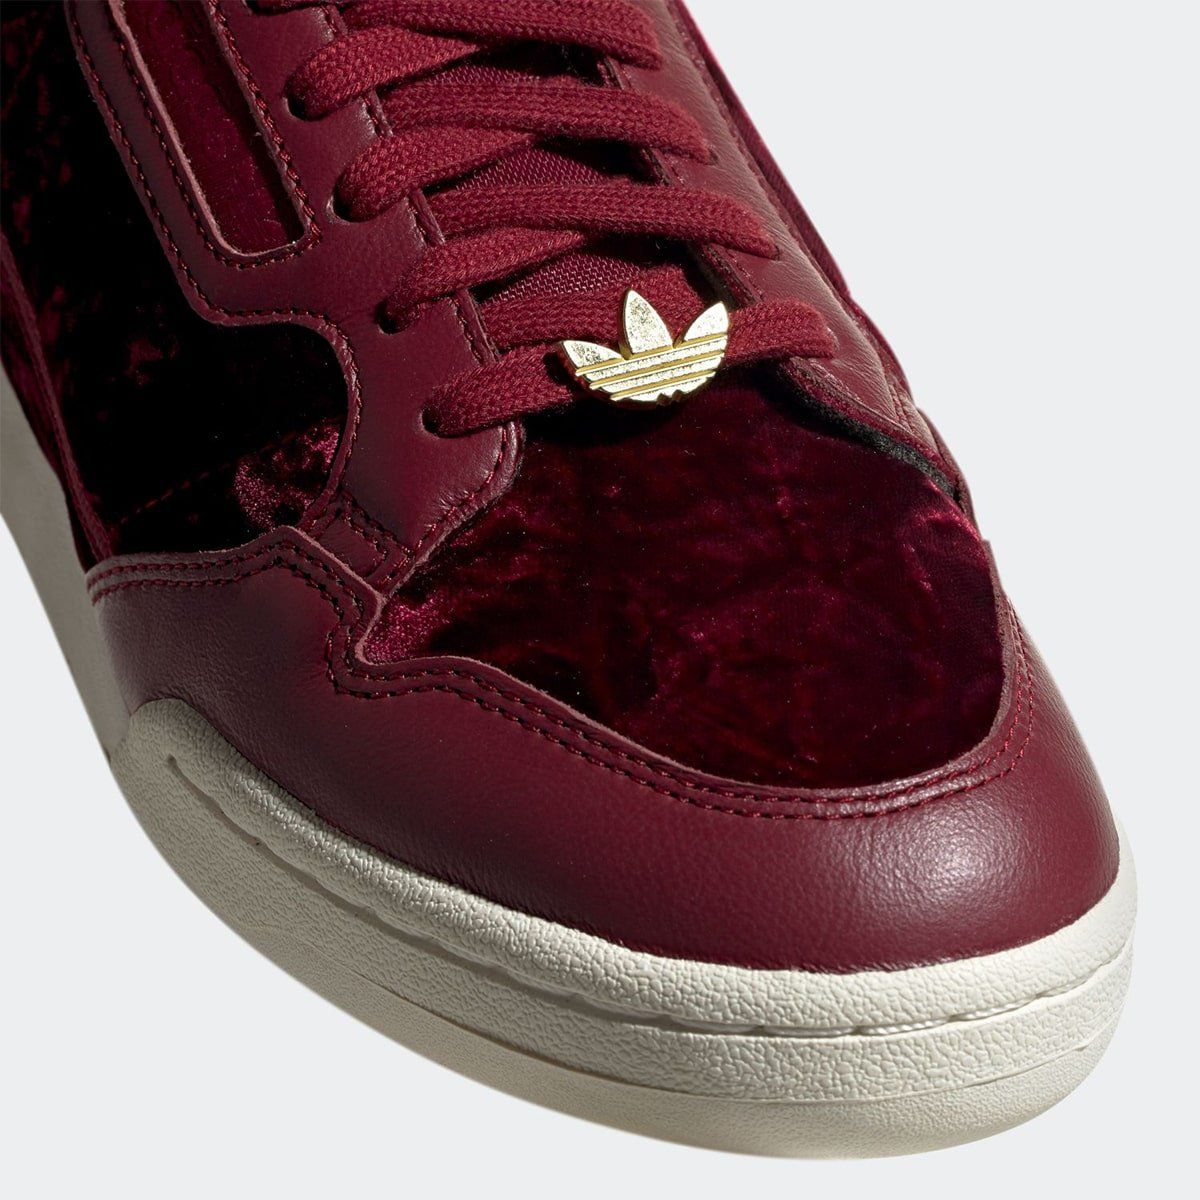 adidas Originals to Release Four-Piece "Velvet Pack" for | HOUSE HEAT